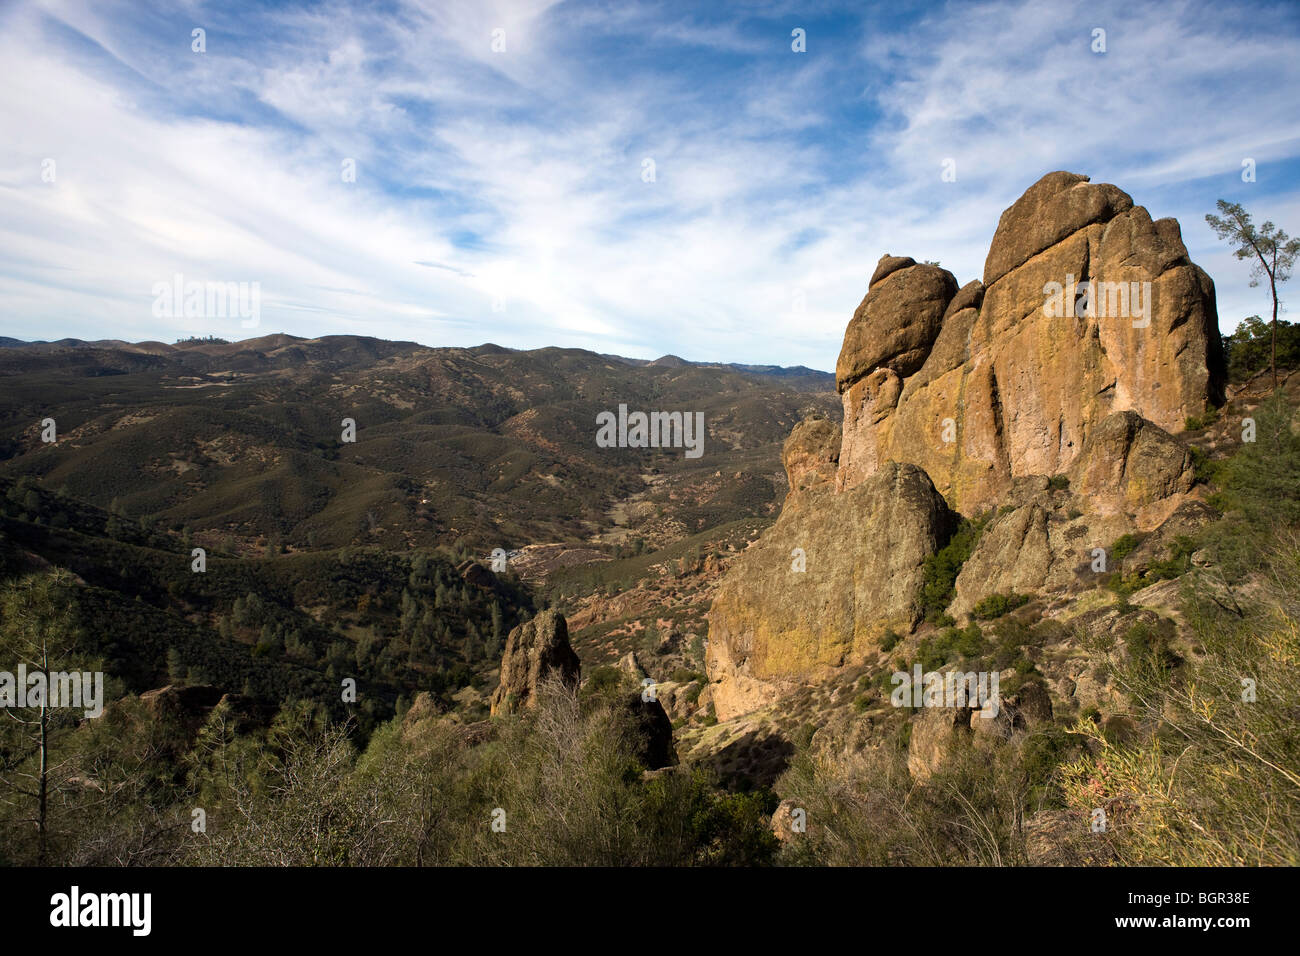 Rock formations along the Tunnel Trail up to High Peaks, Pinnacles National Monument, California, United States of America Stock Photo